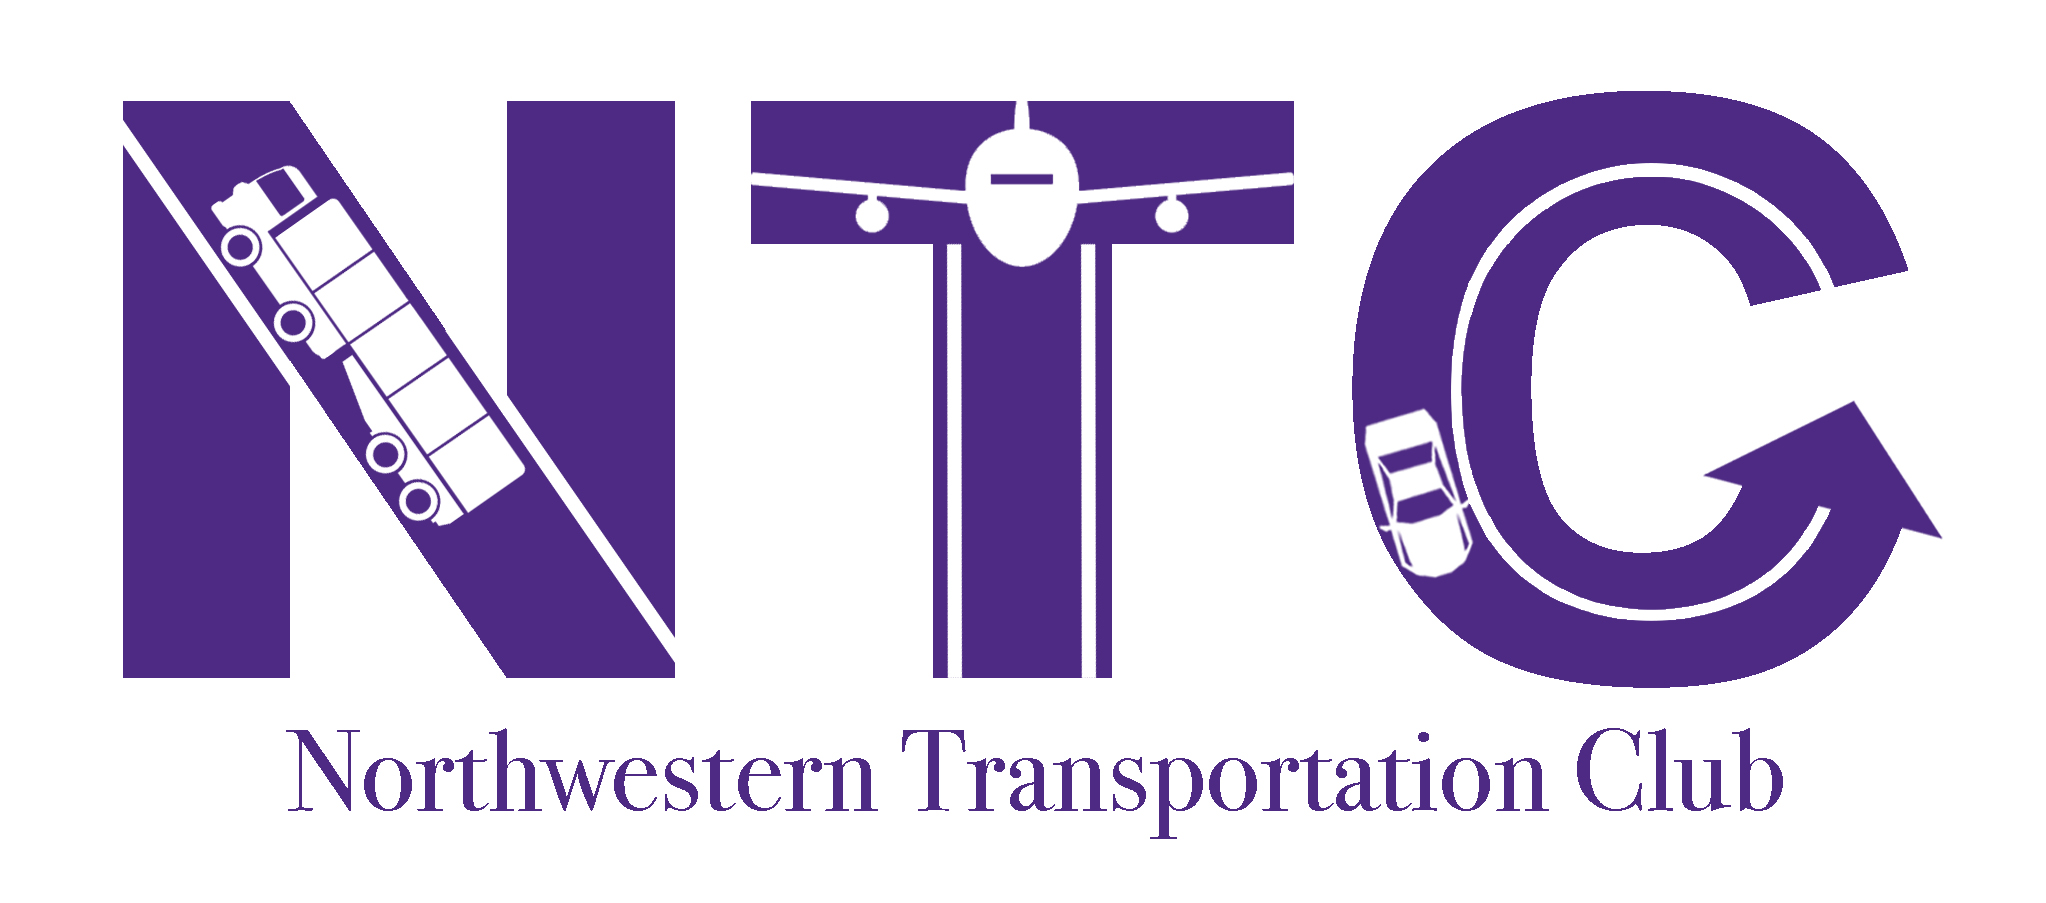 The letters 'NTC' in bold purple, with white icons of a train, plane, and car appearing inside the letters.